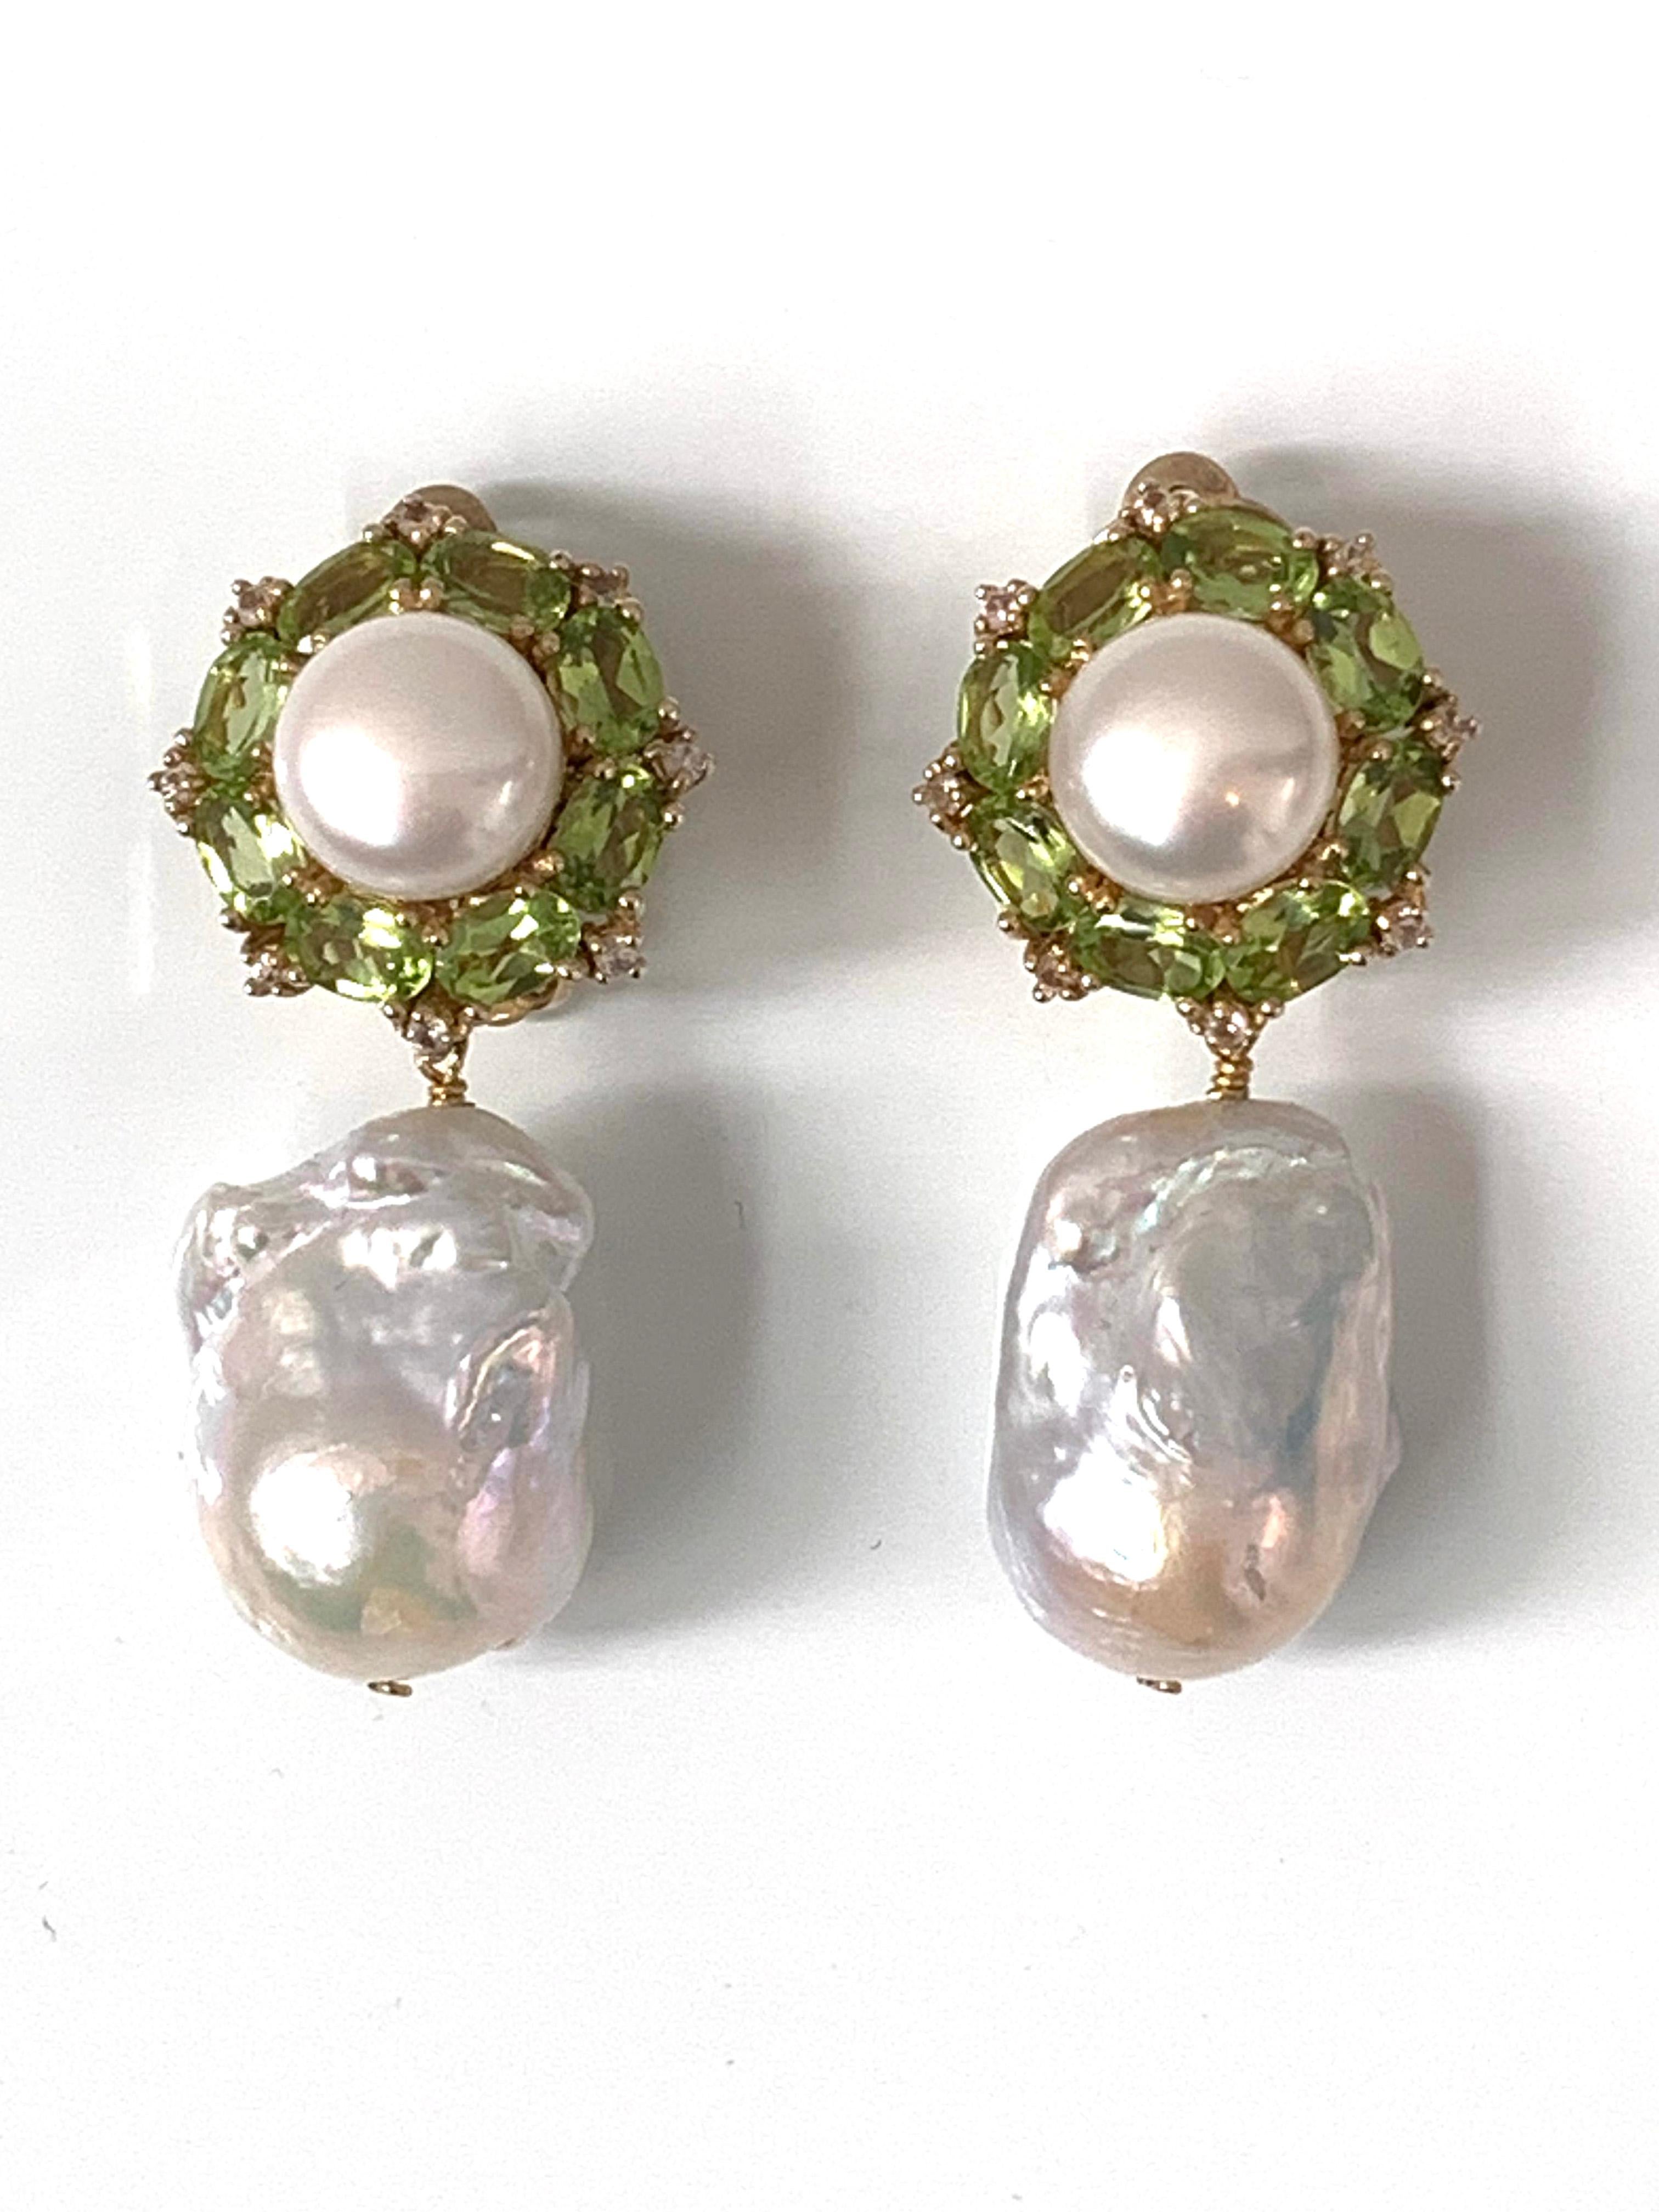 These earrings feature a large pair of high luster white baroque pearls (17mm). Both are elongated baroque shapes, blemish free and possess brilliant luster. Top part of the earrings feature a pair of high luster fresh water pearls, oval peridot,